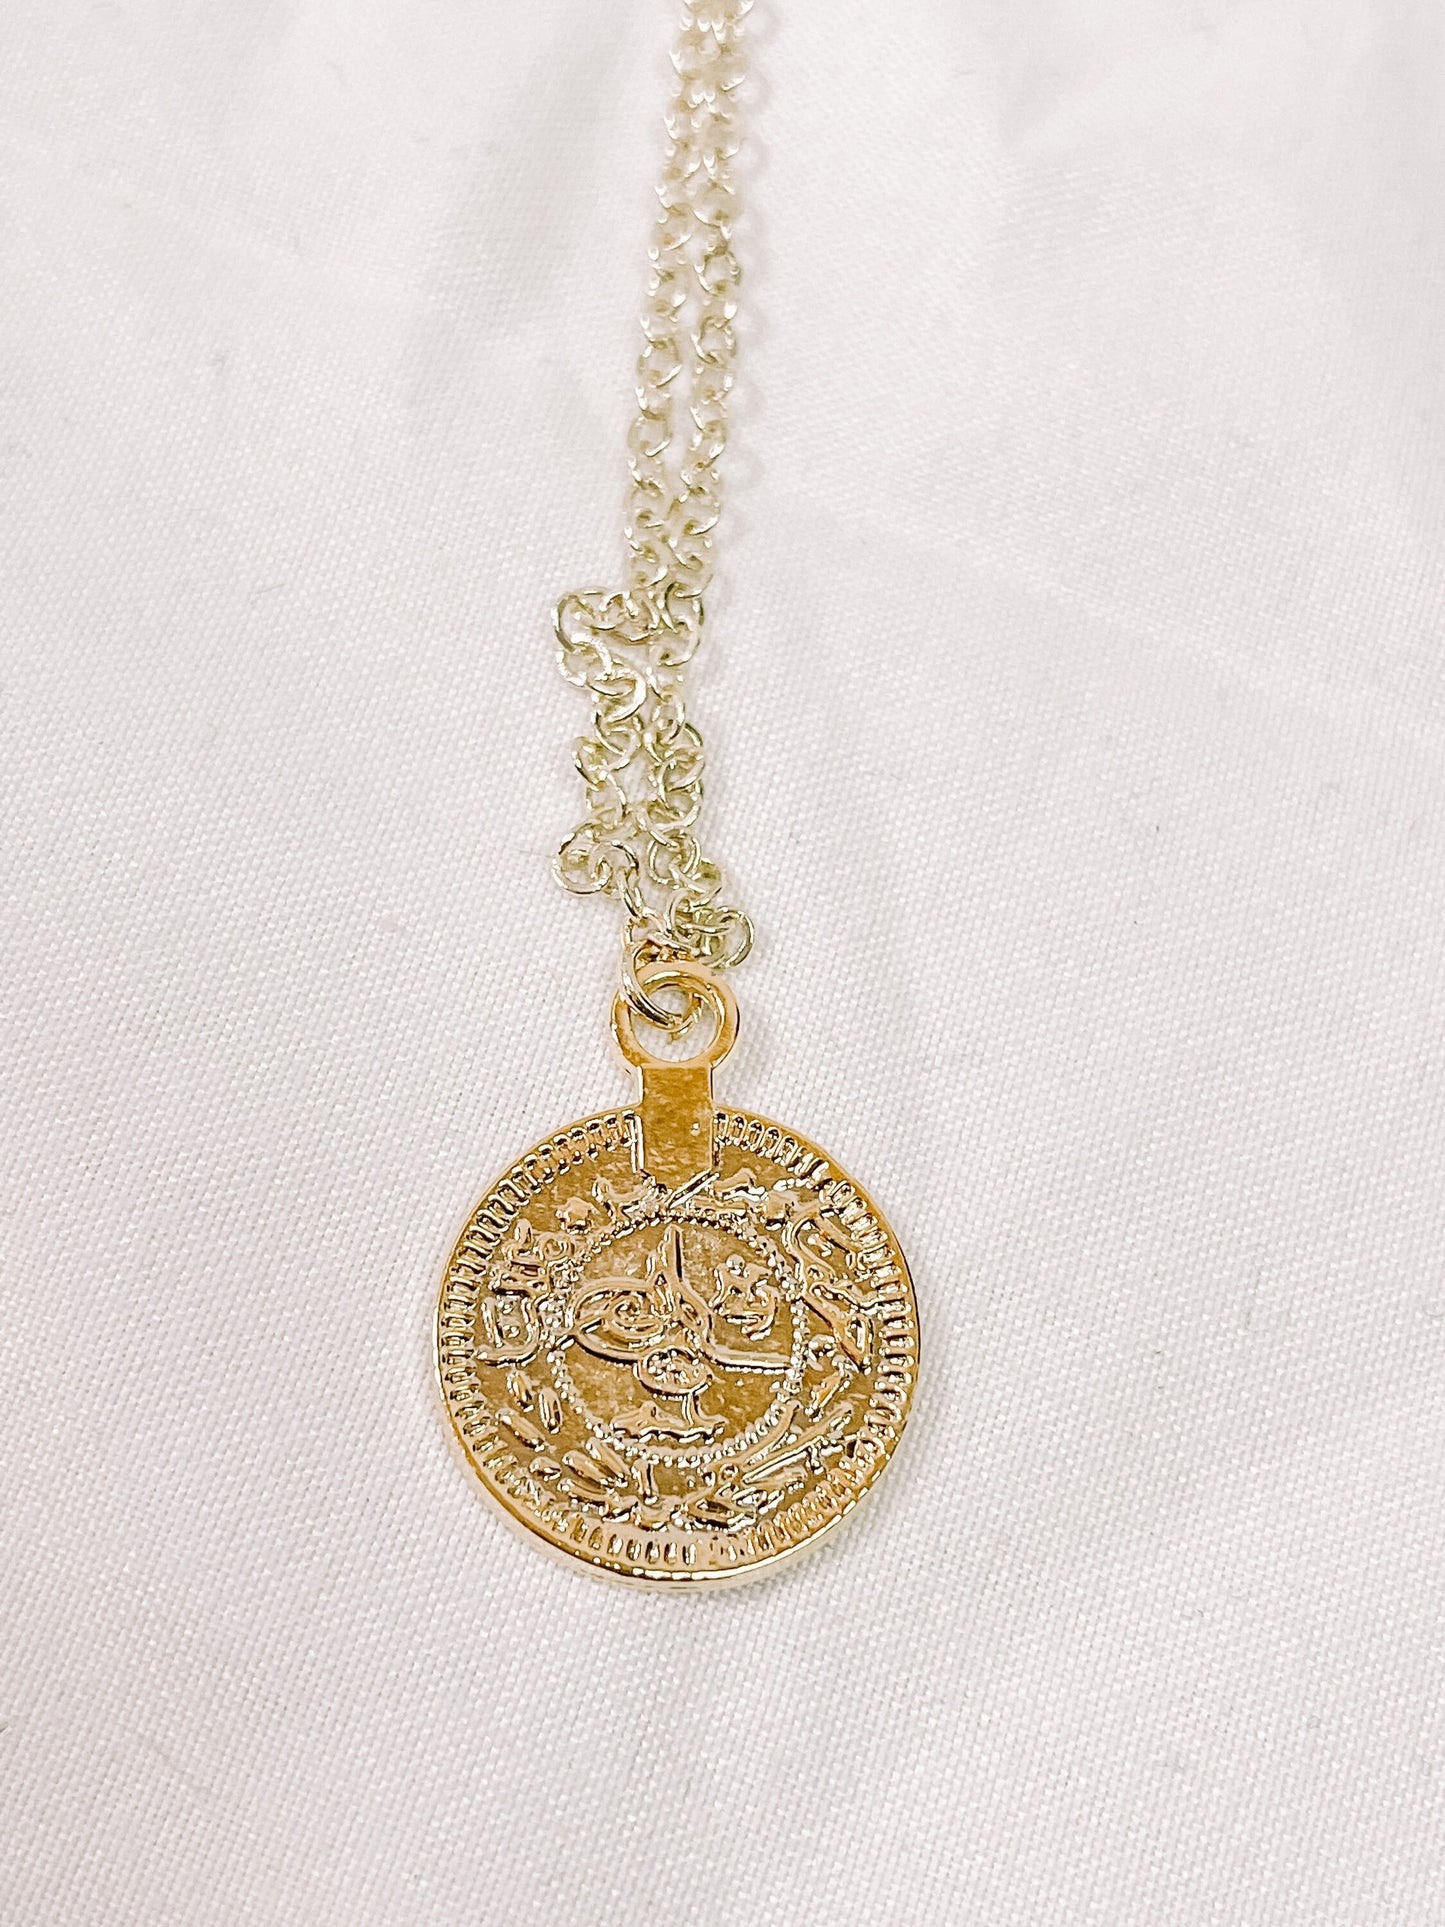 Vintage inspired coin pendant necklace